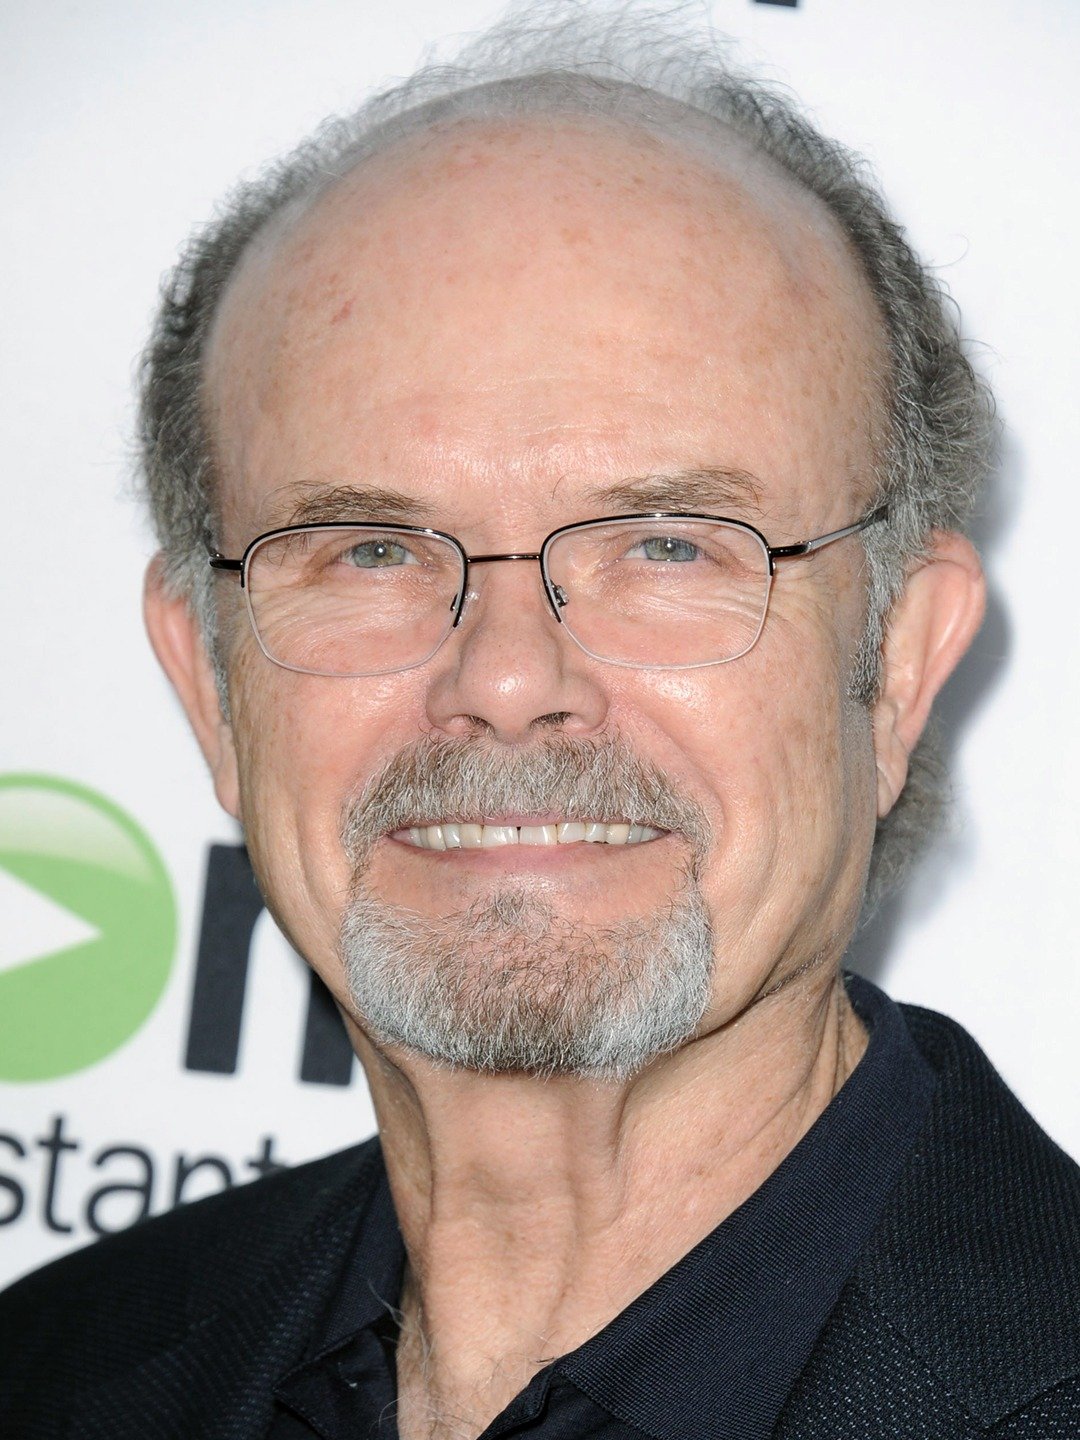 How tall is Kurtwood Smith?